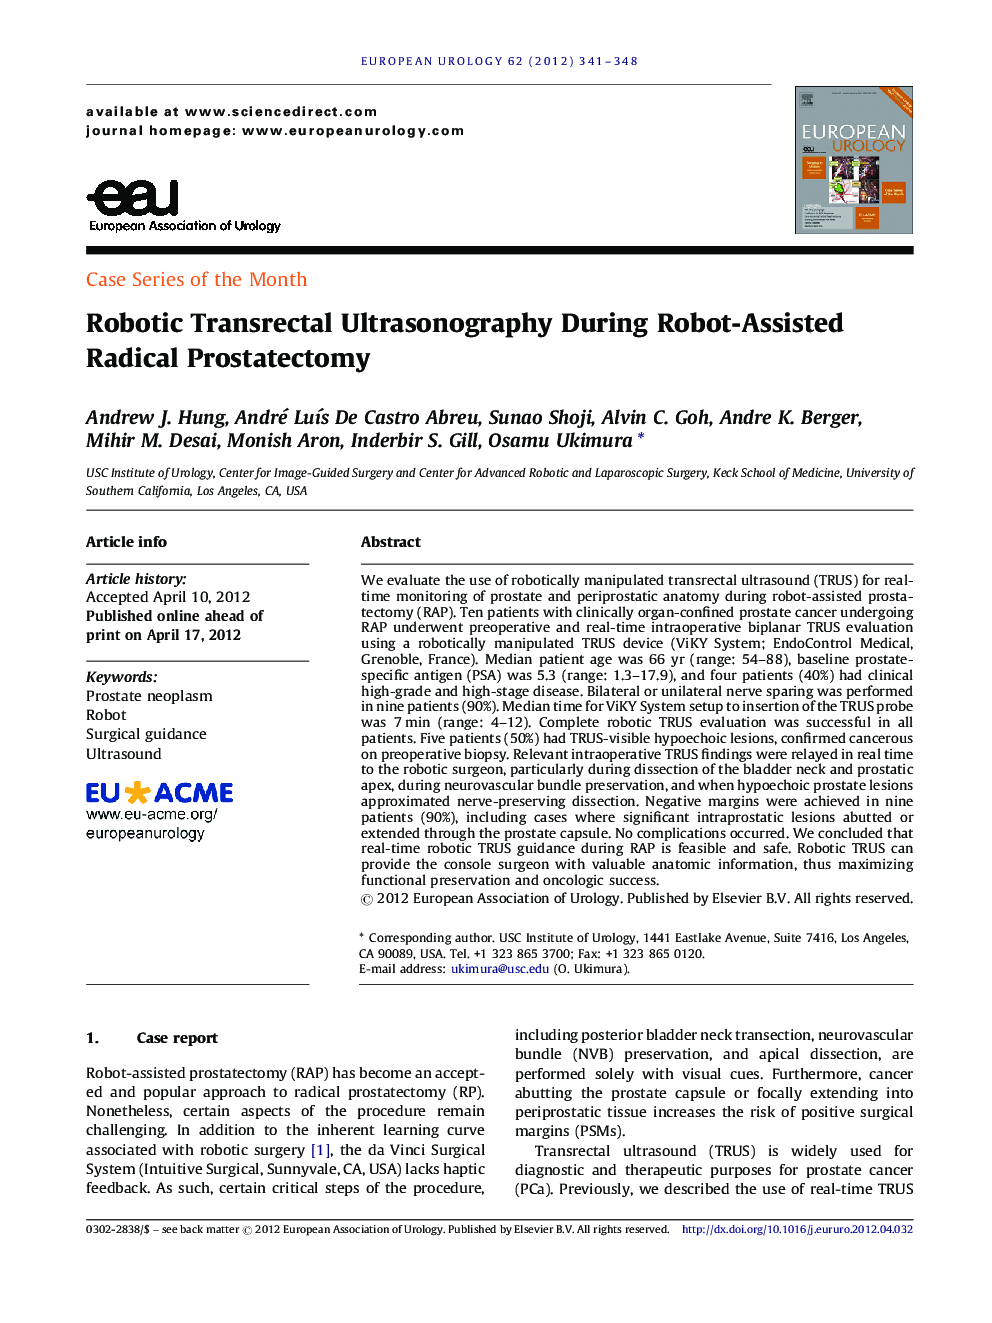 Robotic Transrectal Ultrasonography During Robot-Assisted Radical Prostatectomy